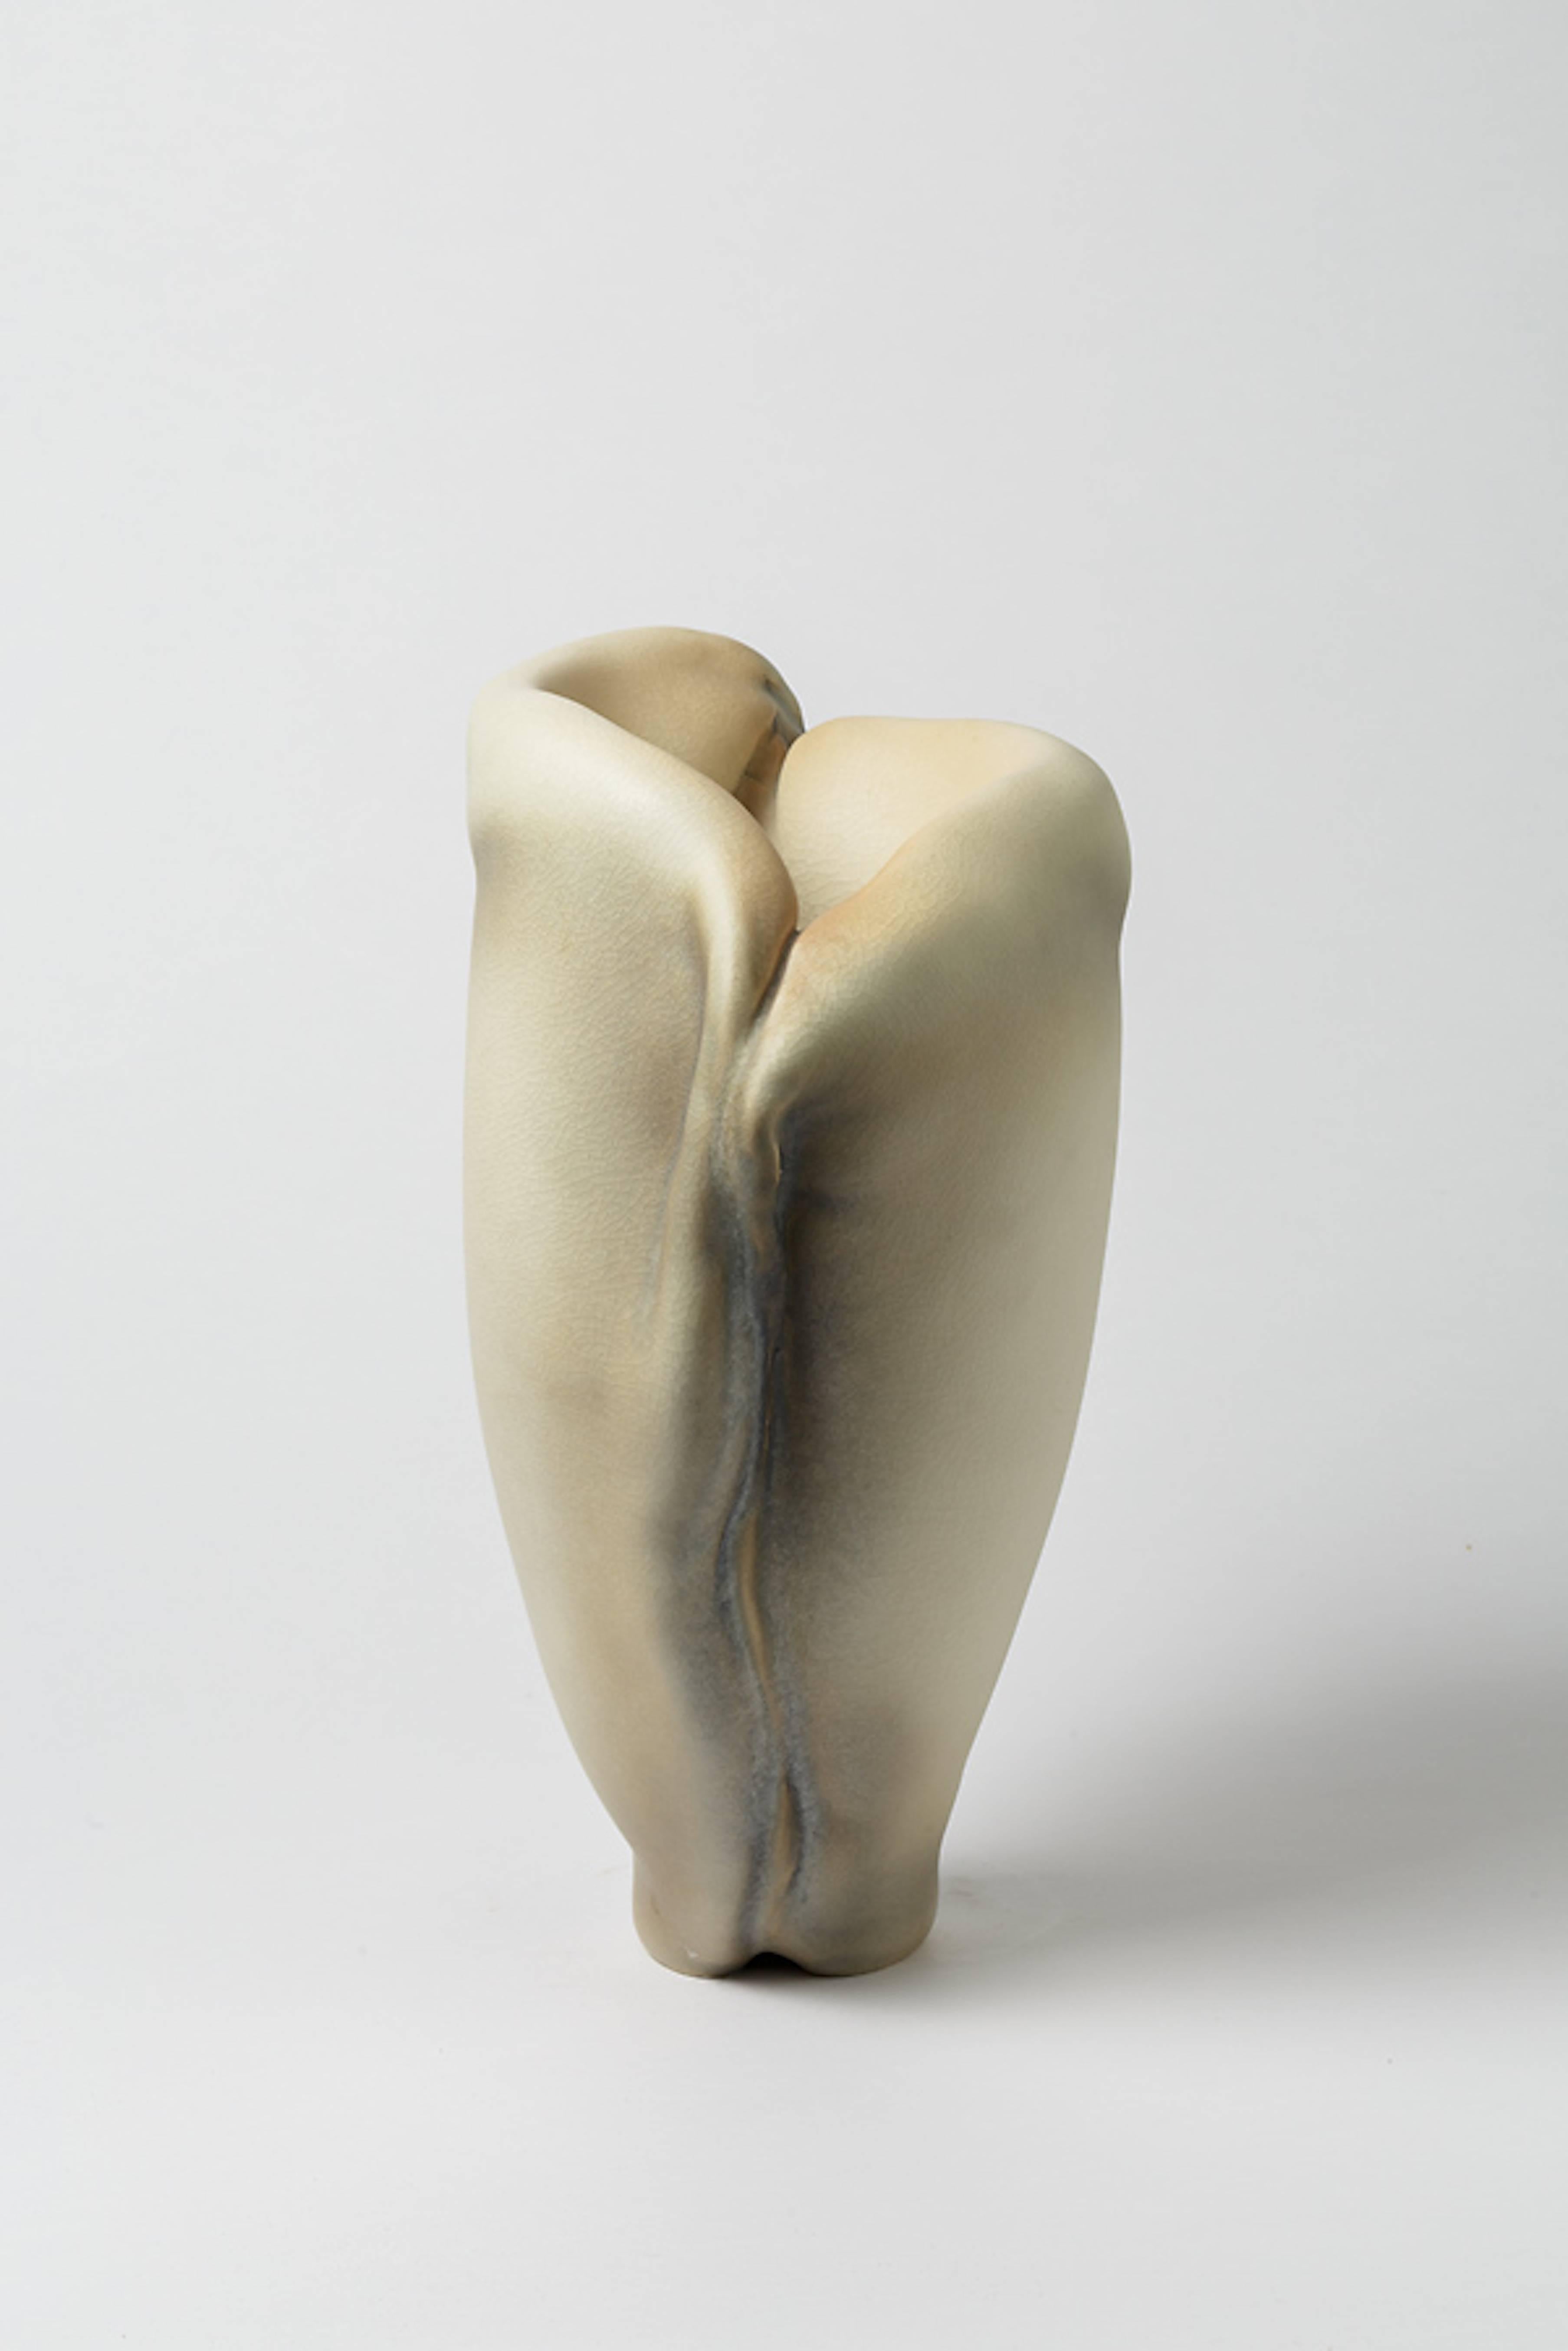 Molded Porcelain Sculpture by Wayne Fischer, French-American, circa 2016